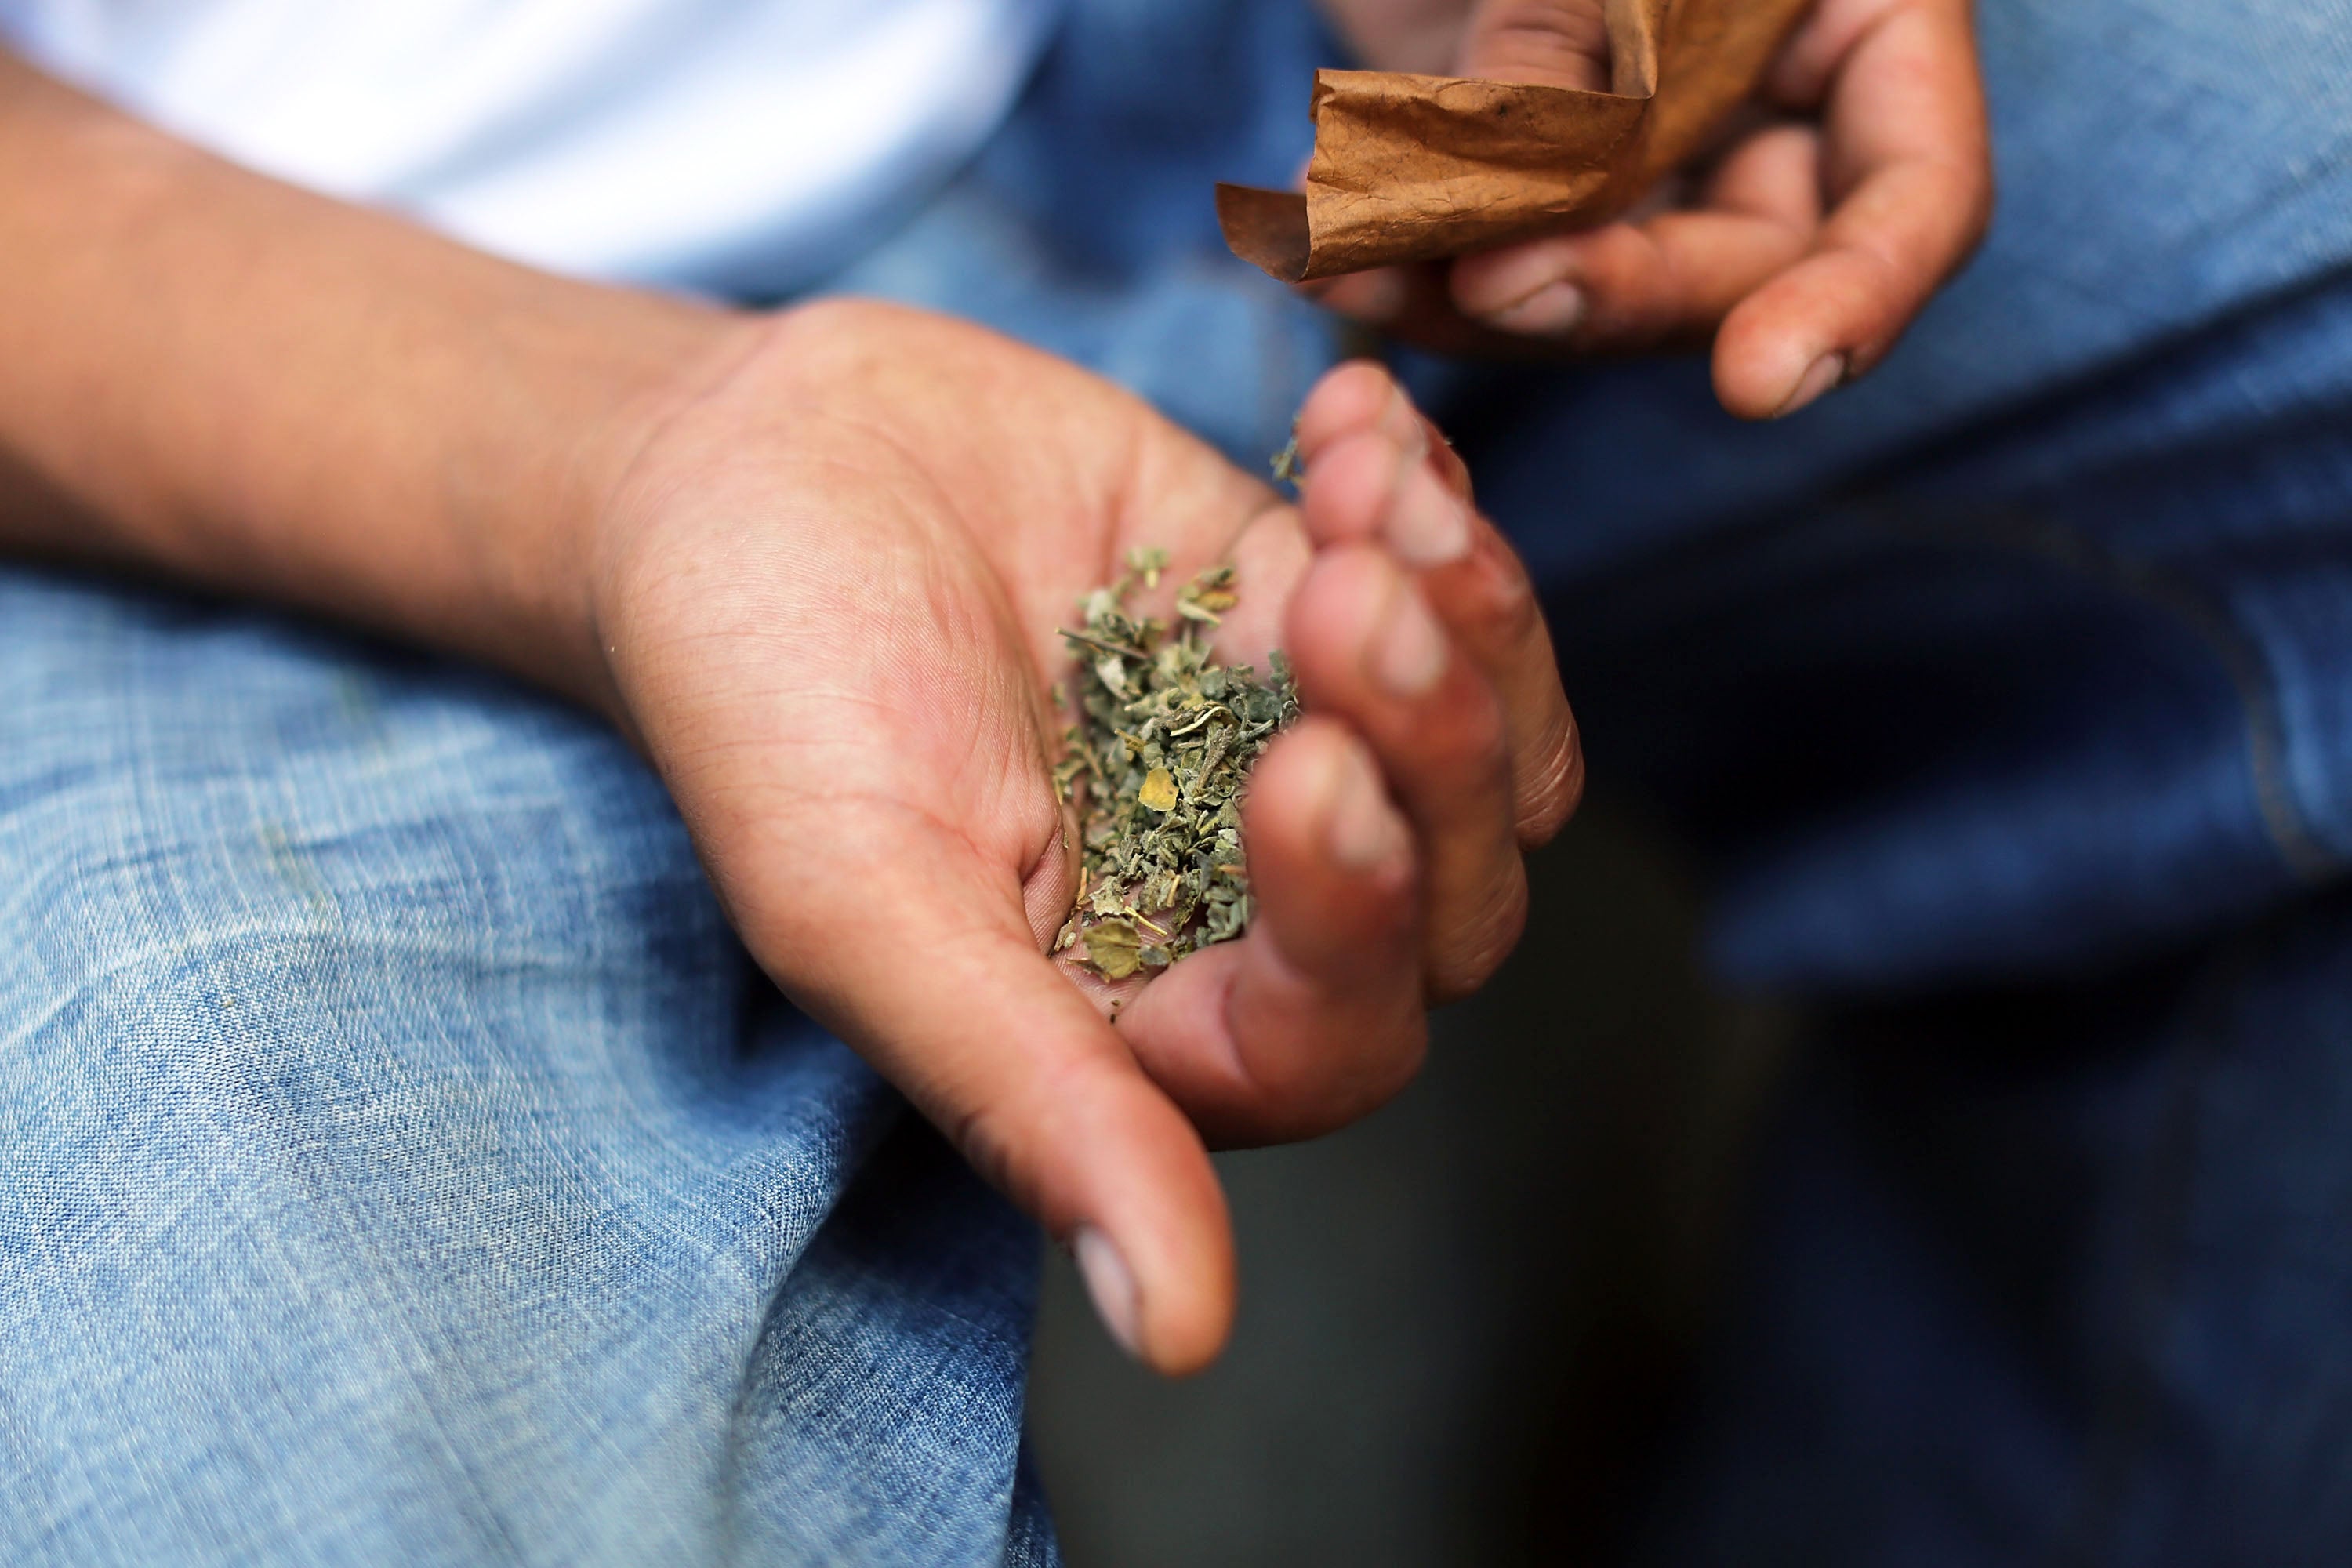 The Legality of Synthetic Cannabis